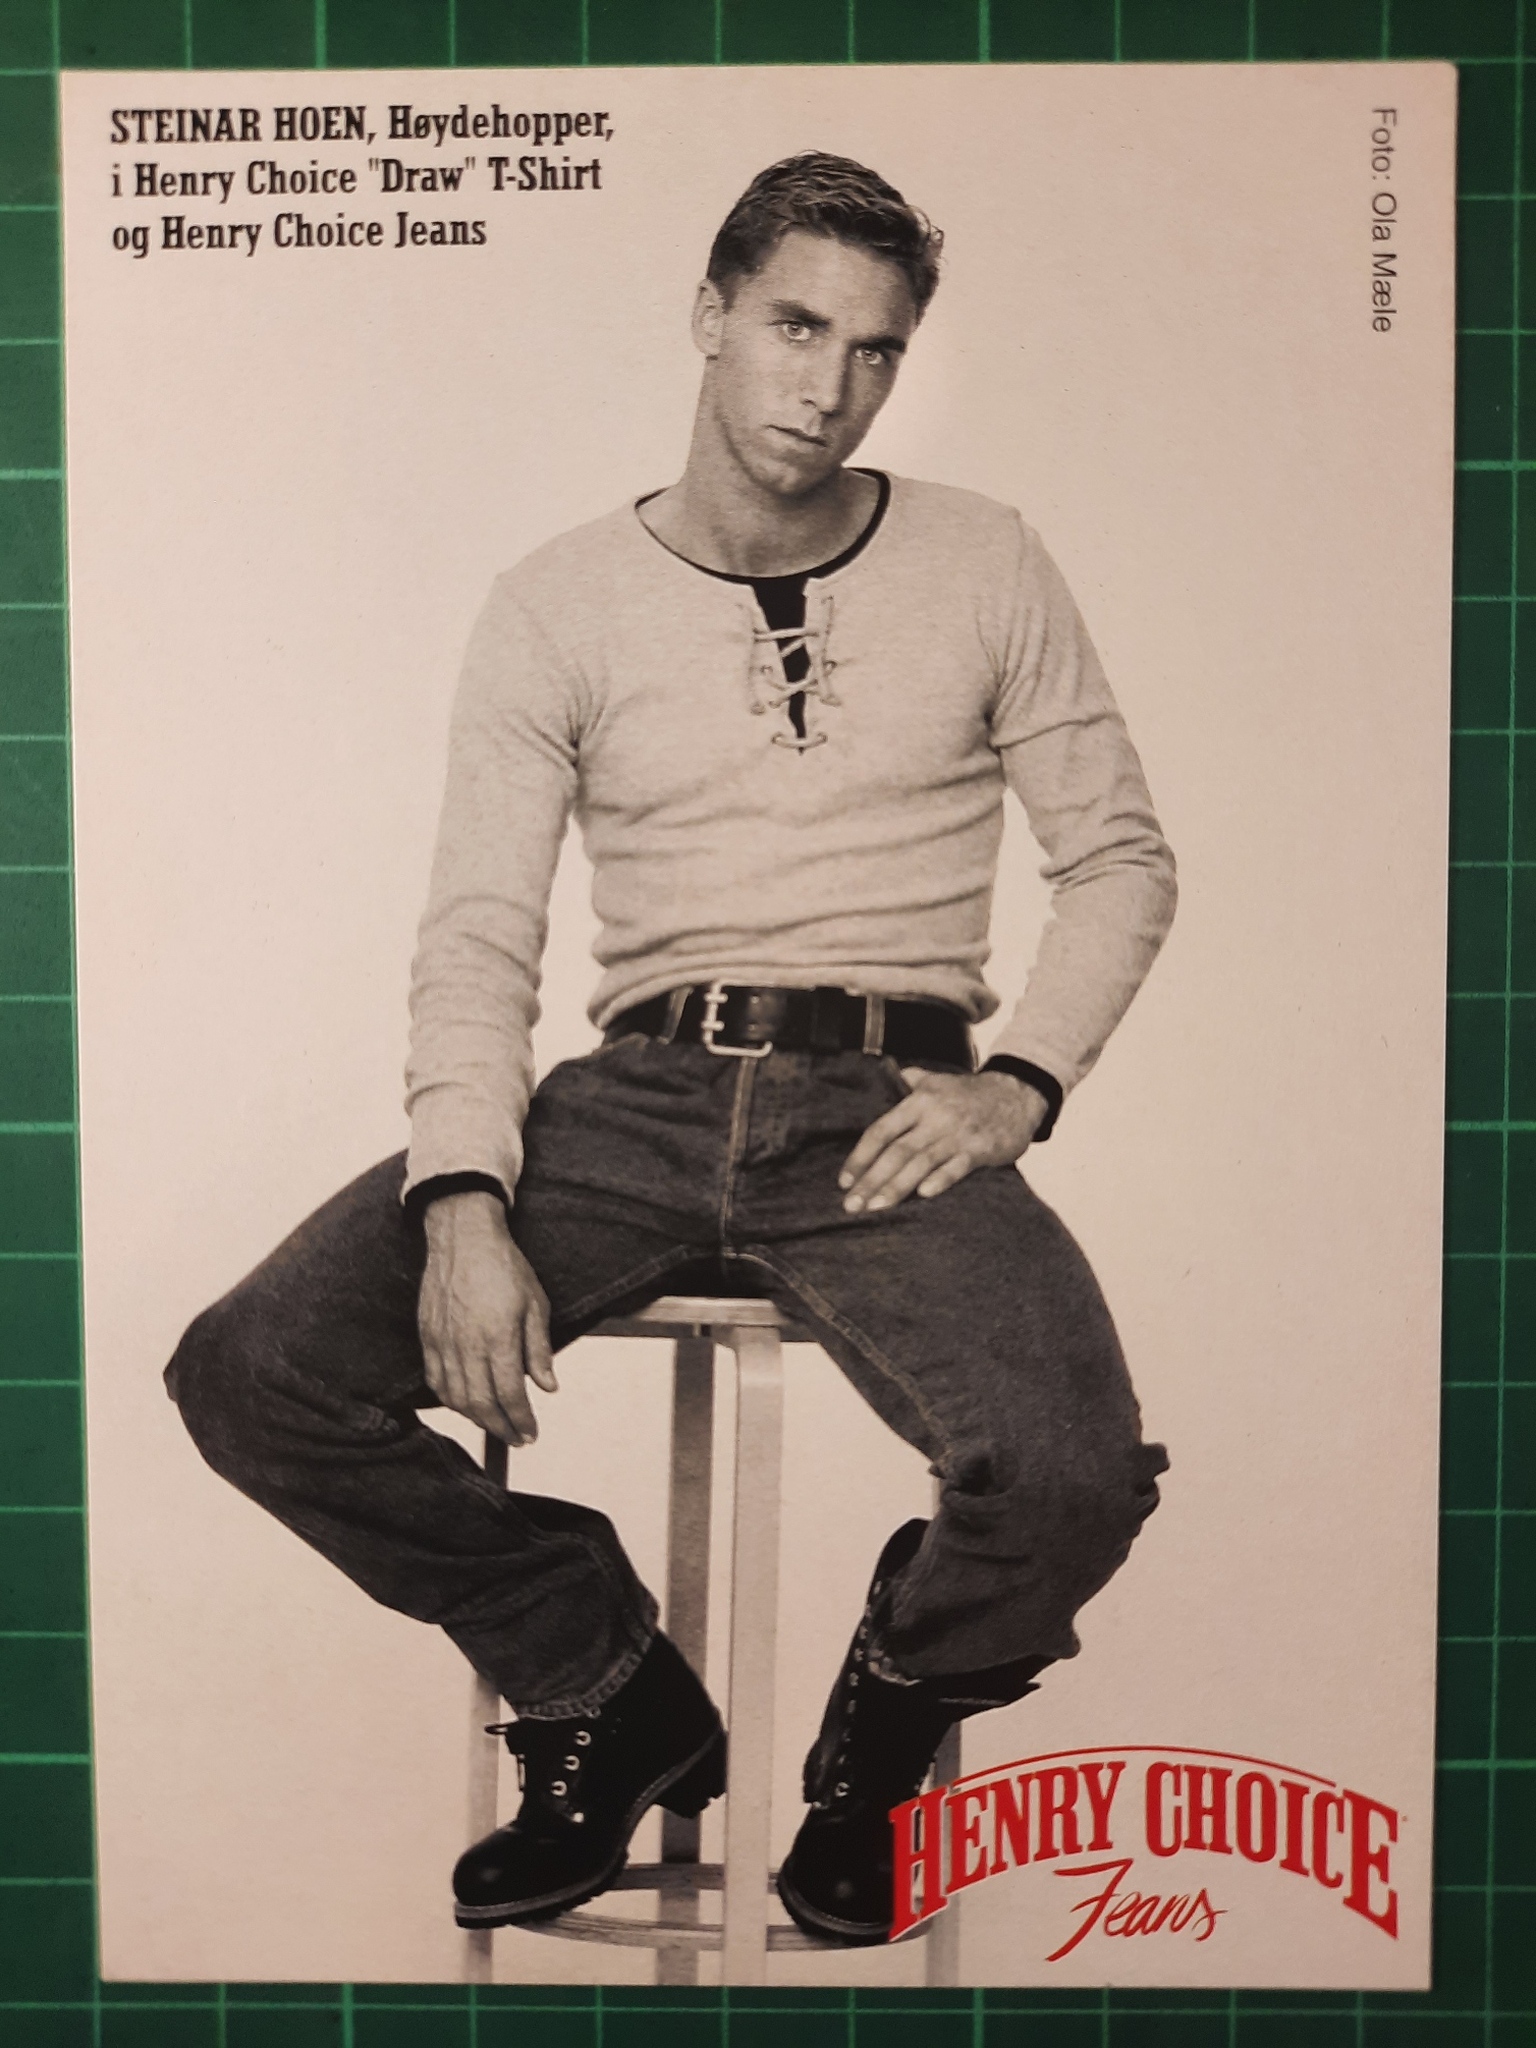 Henry Choise jeans